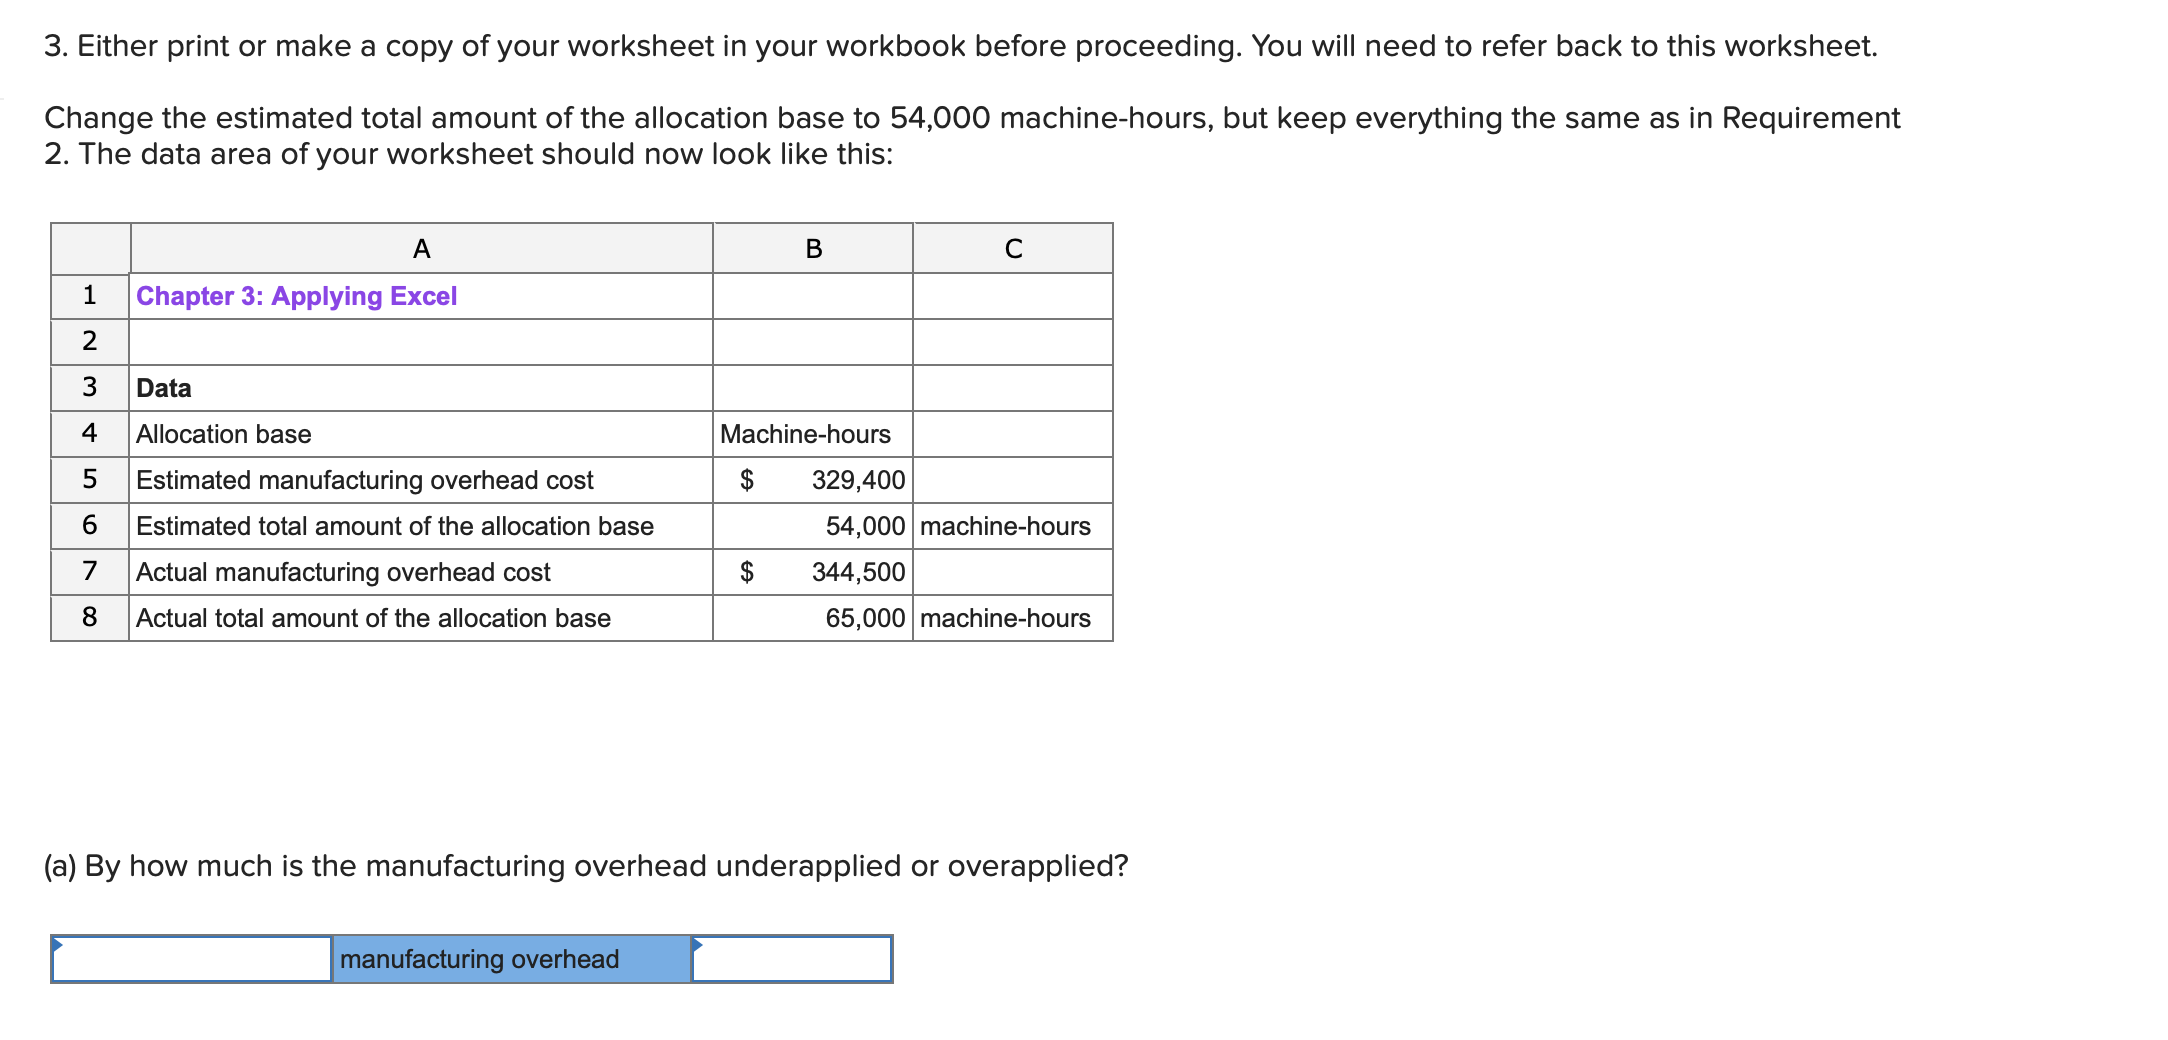 3. Either print or make a copy of your worksheet in your workbook before proceeding. You will need to refer